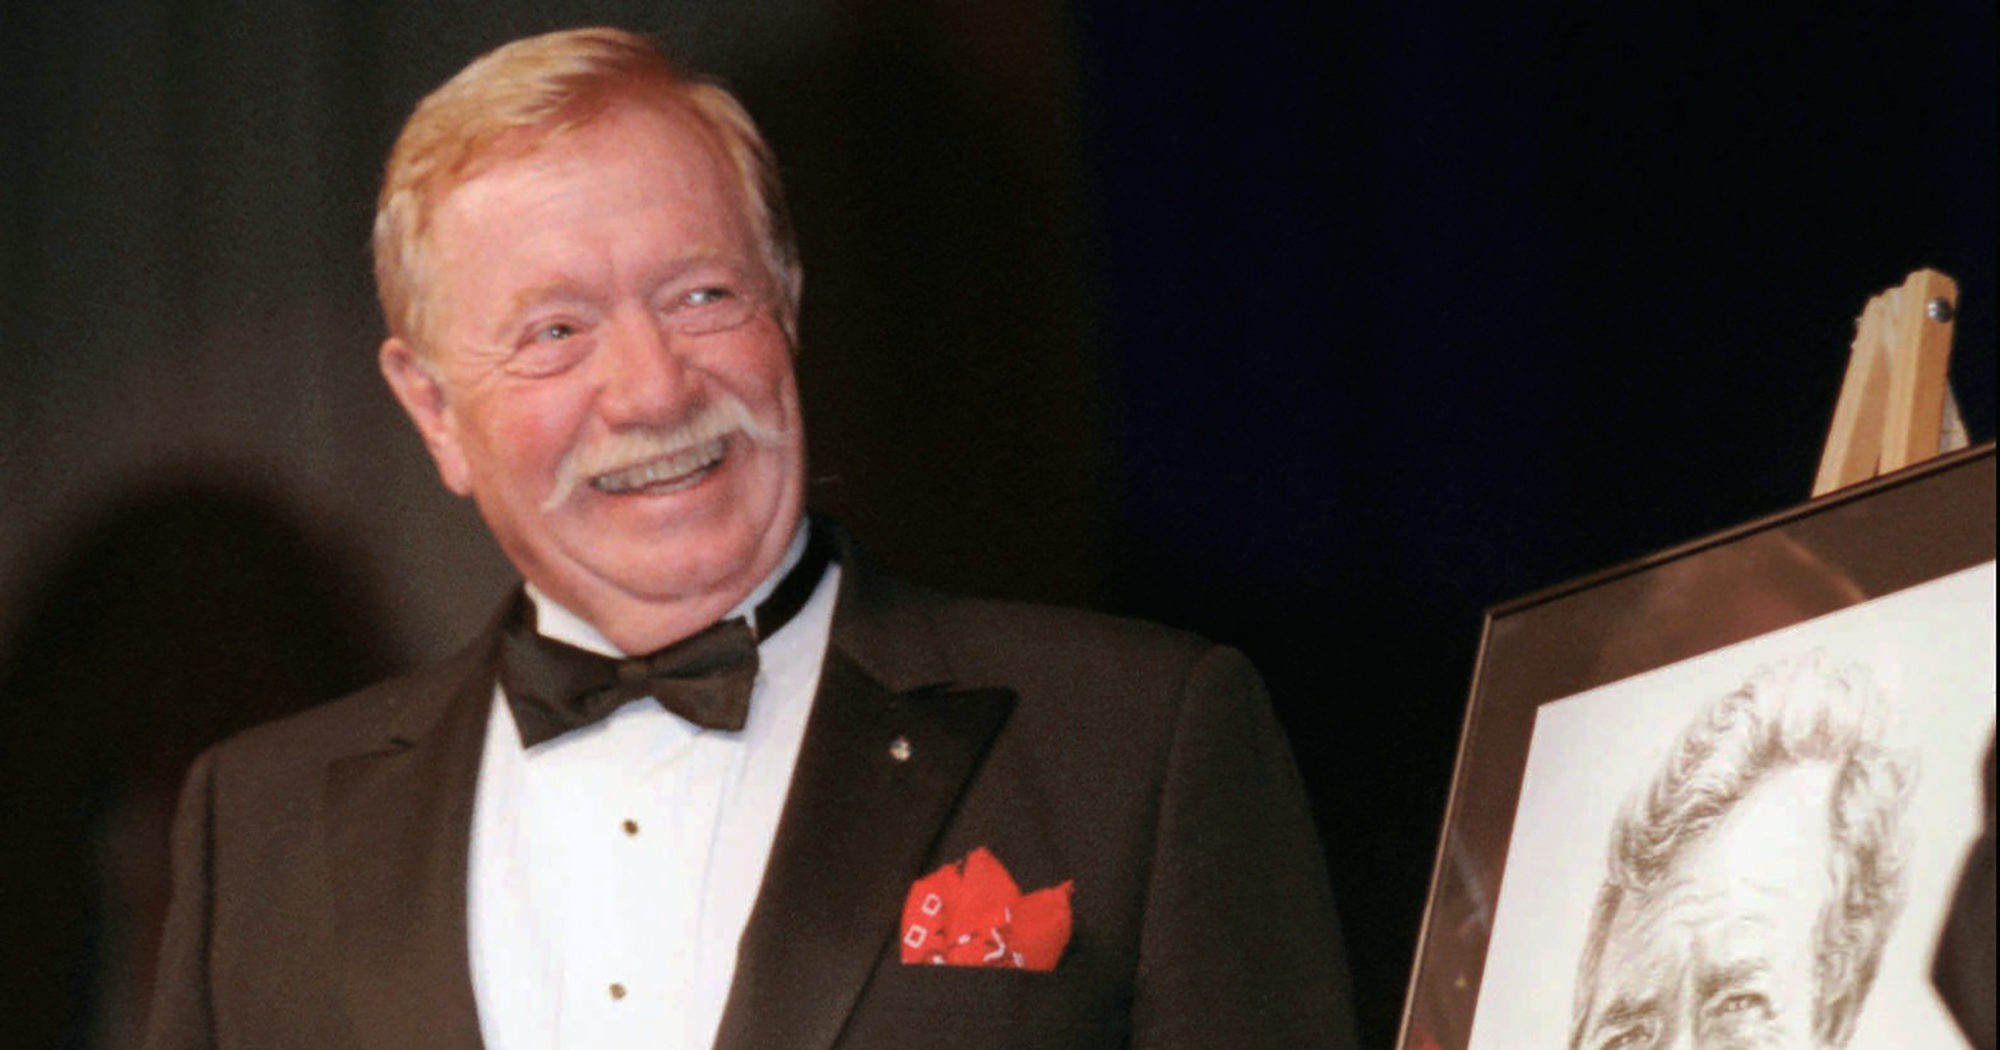 Retired Air Force Col. Joseph W. Kittinger Jr. smiles during his induction into the Aviation Hall of Fame on July 19, 1997, in Dayton, Ohio.